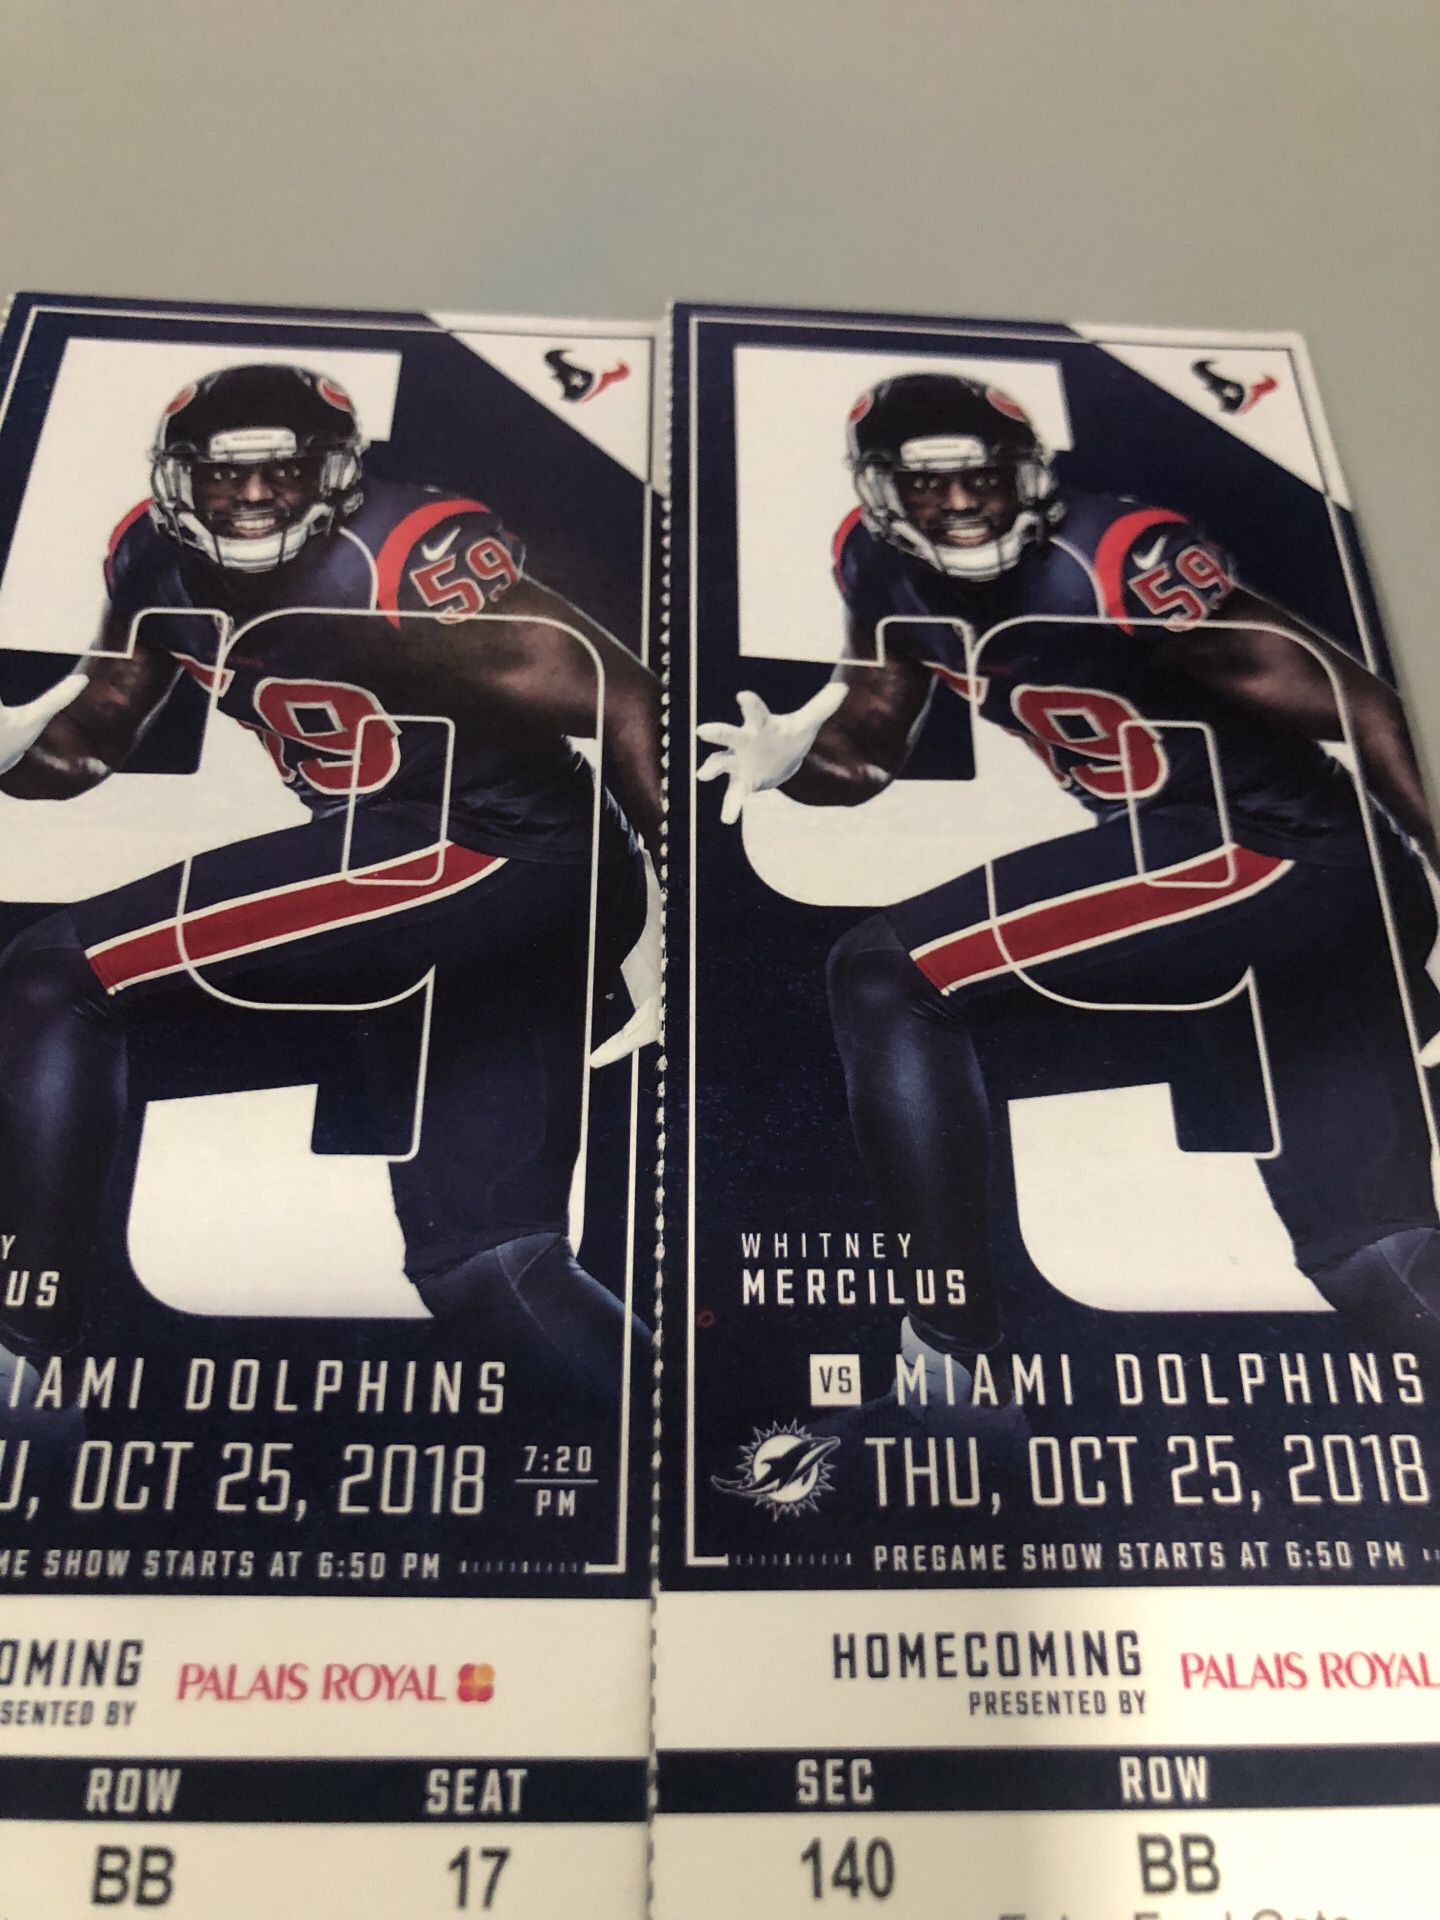 Texans/Dolphins Oct25th. Lower Level